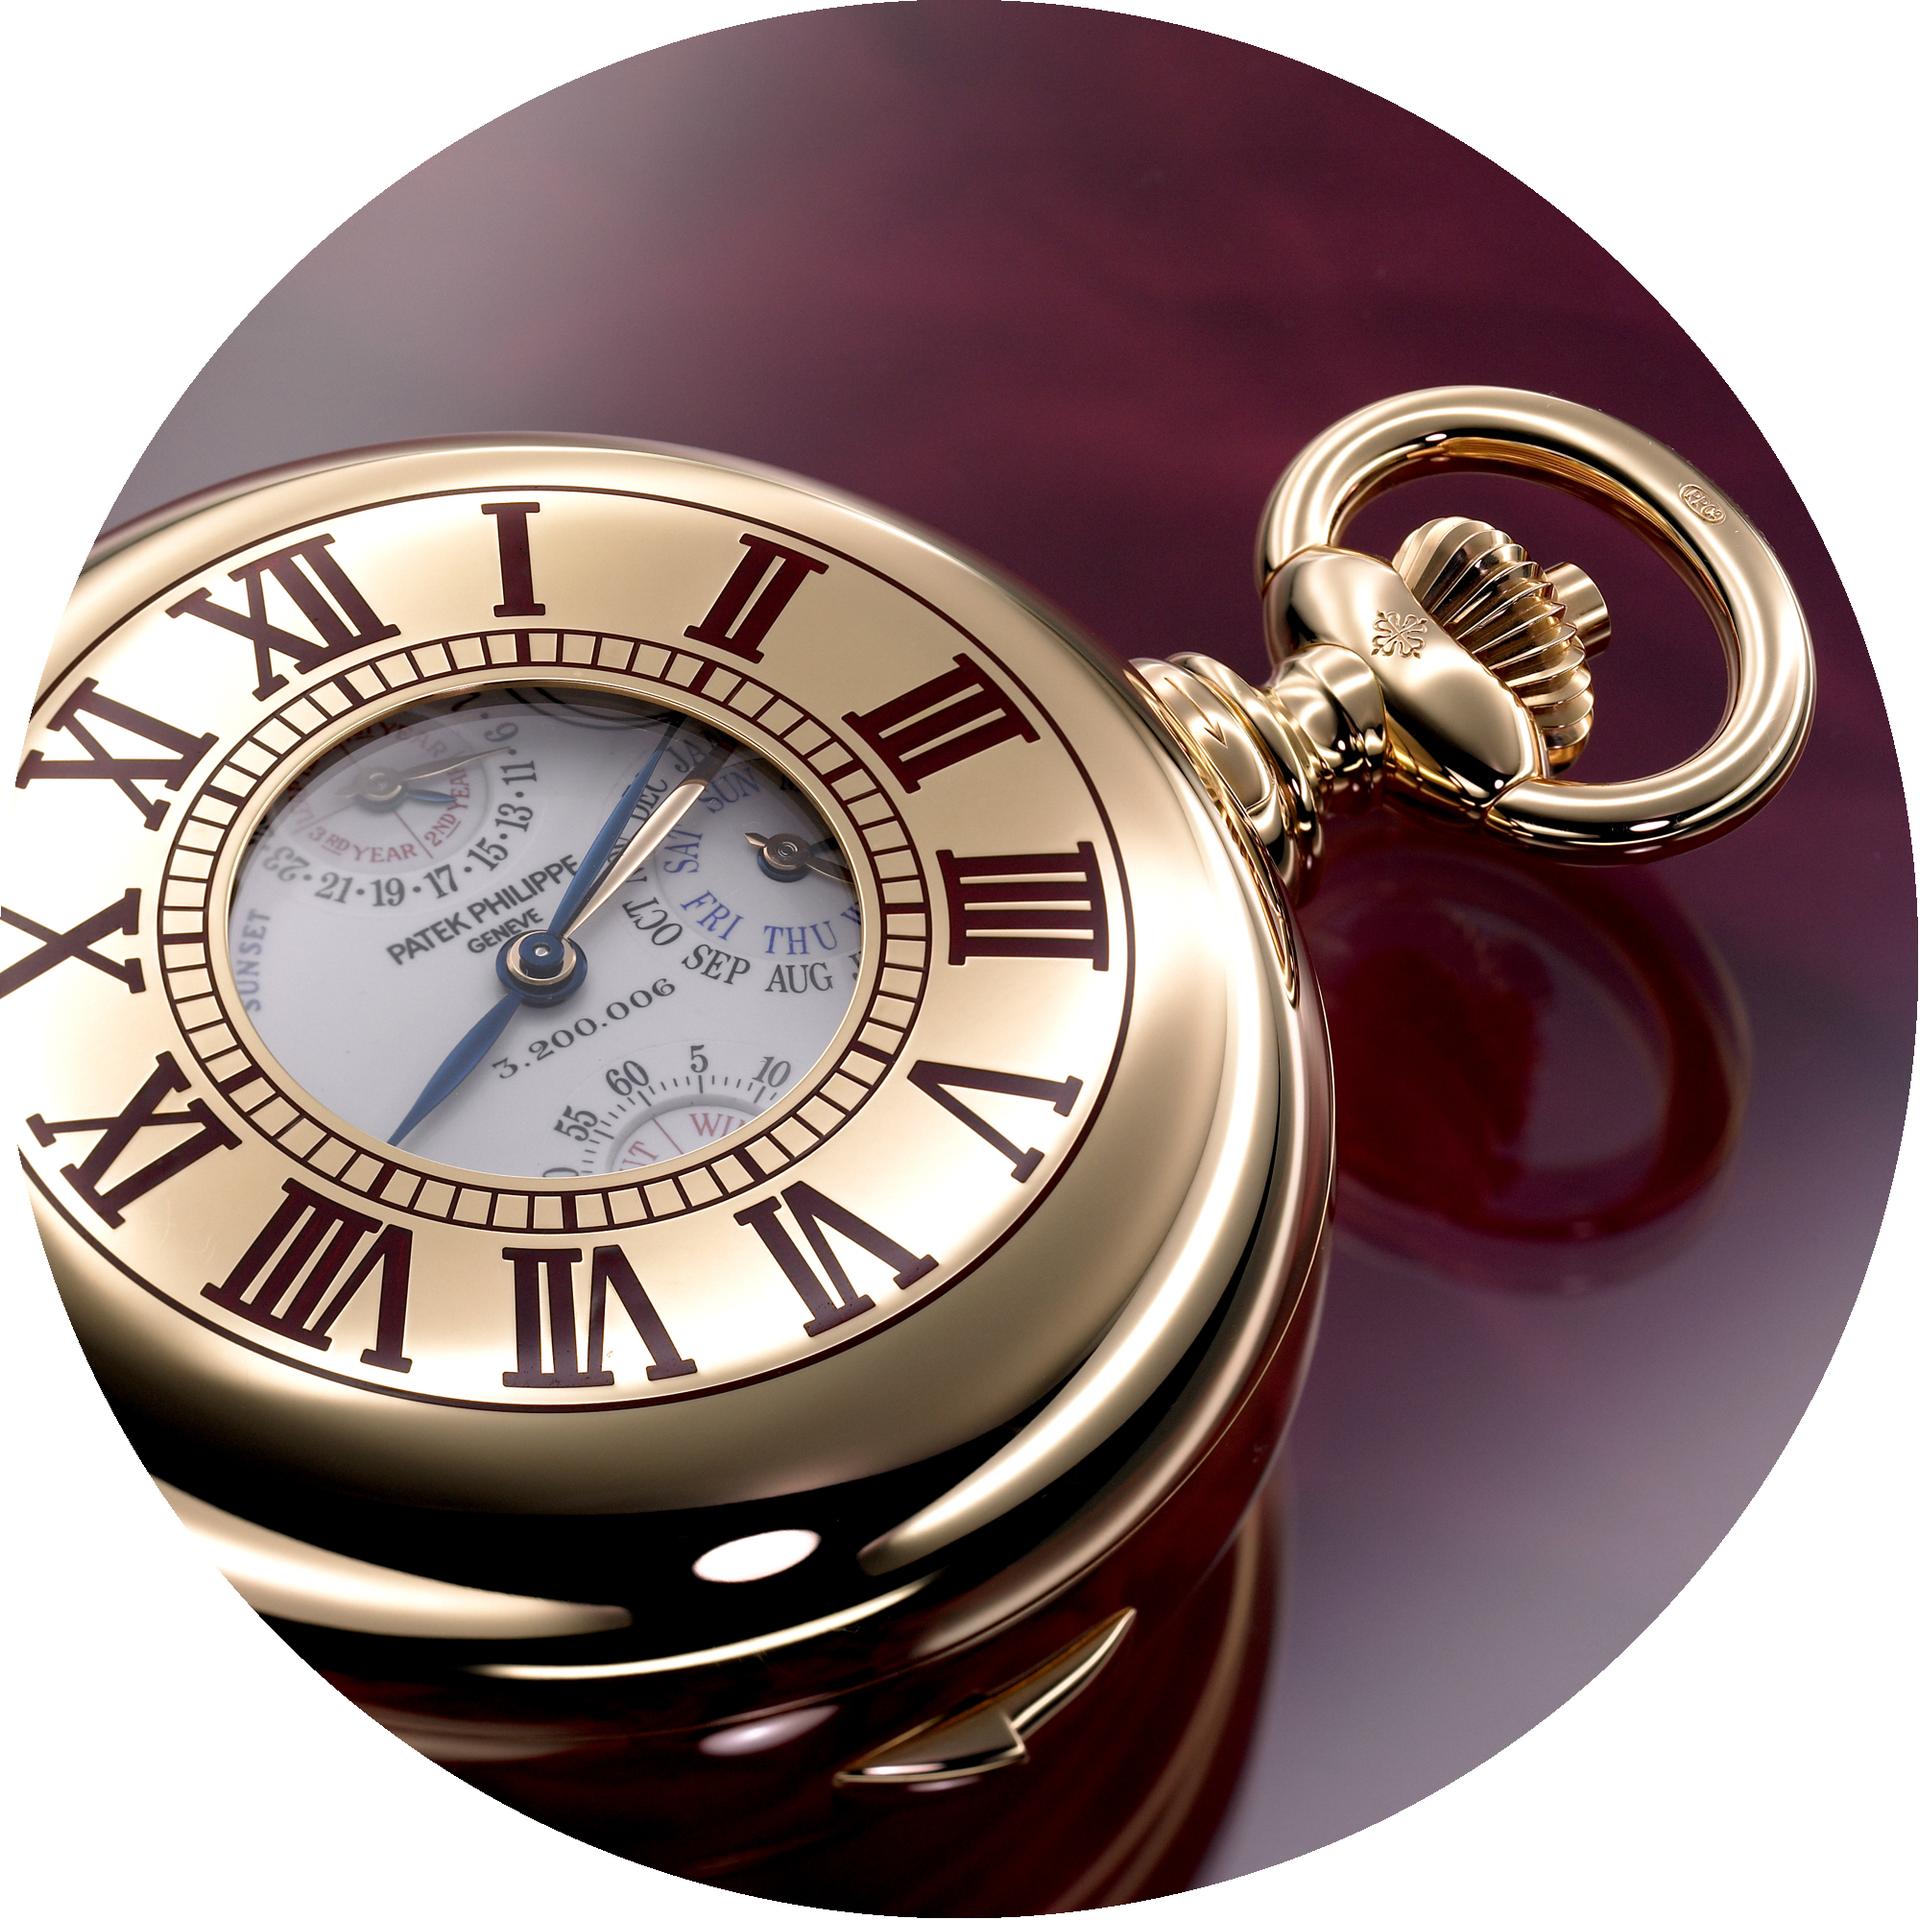 Patek Philippe's president on his sons, a secret watch colour and